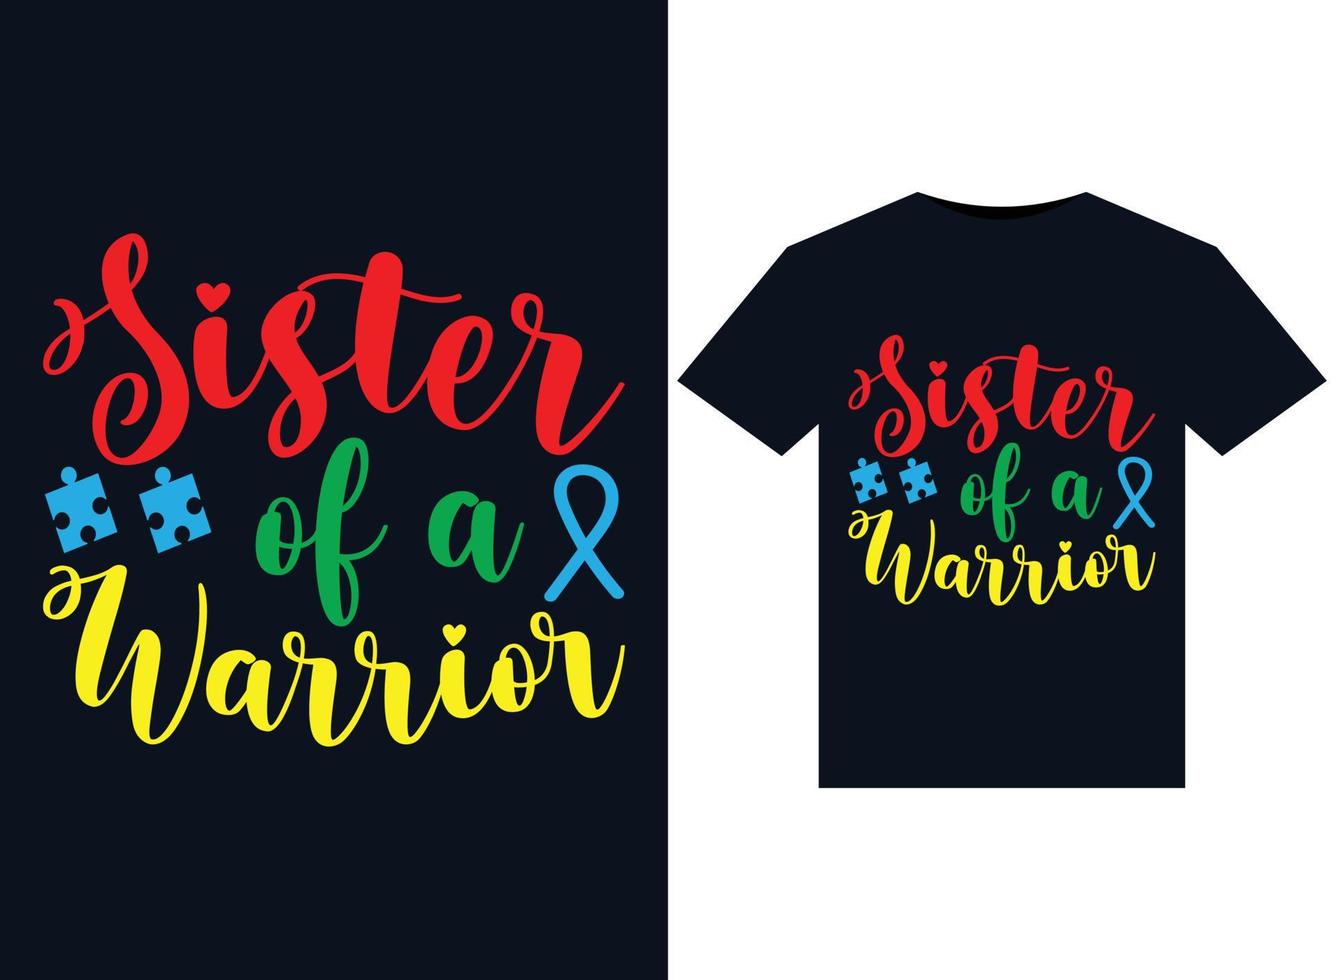 Sister of a warrior illustrations for print-ready T-Shirts design vector